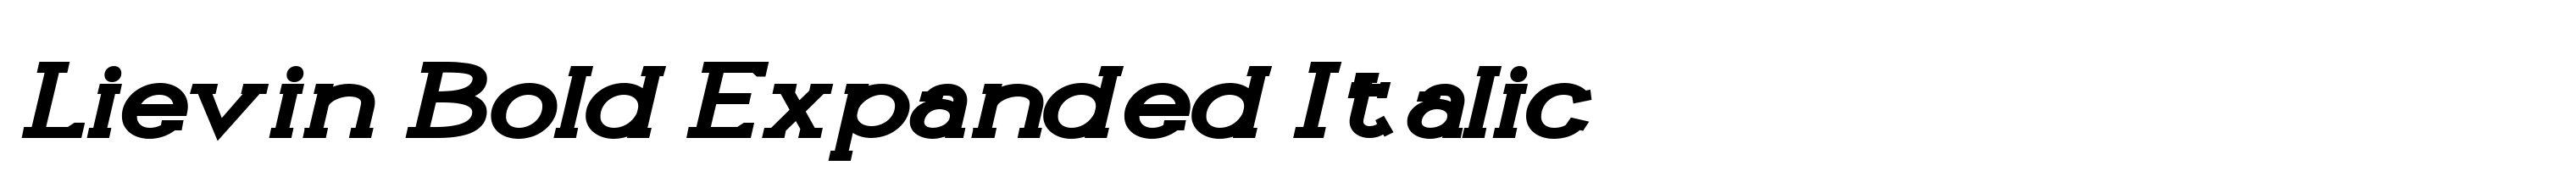 Lievin Bold Expanded Italic